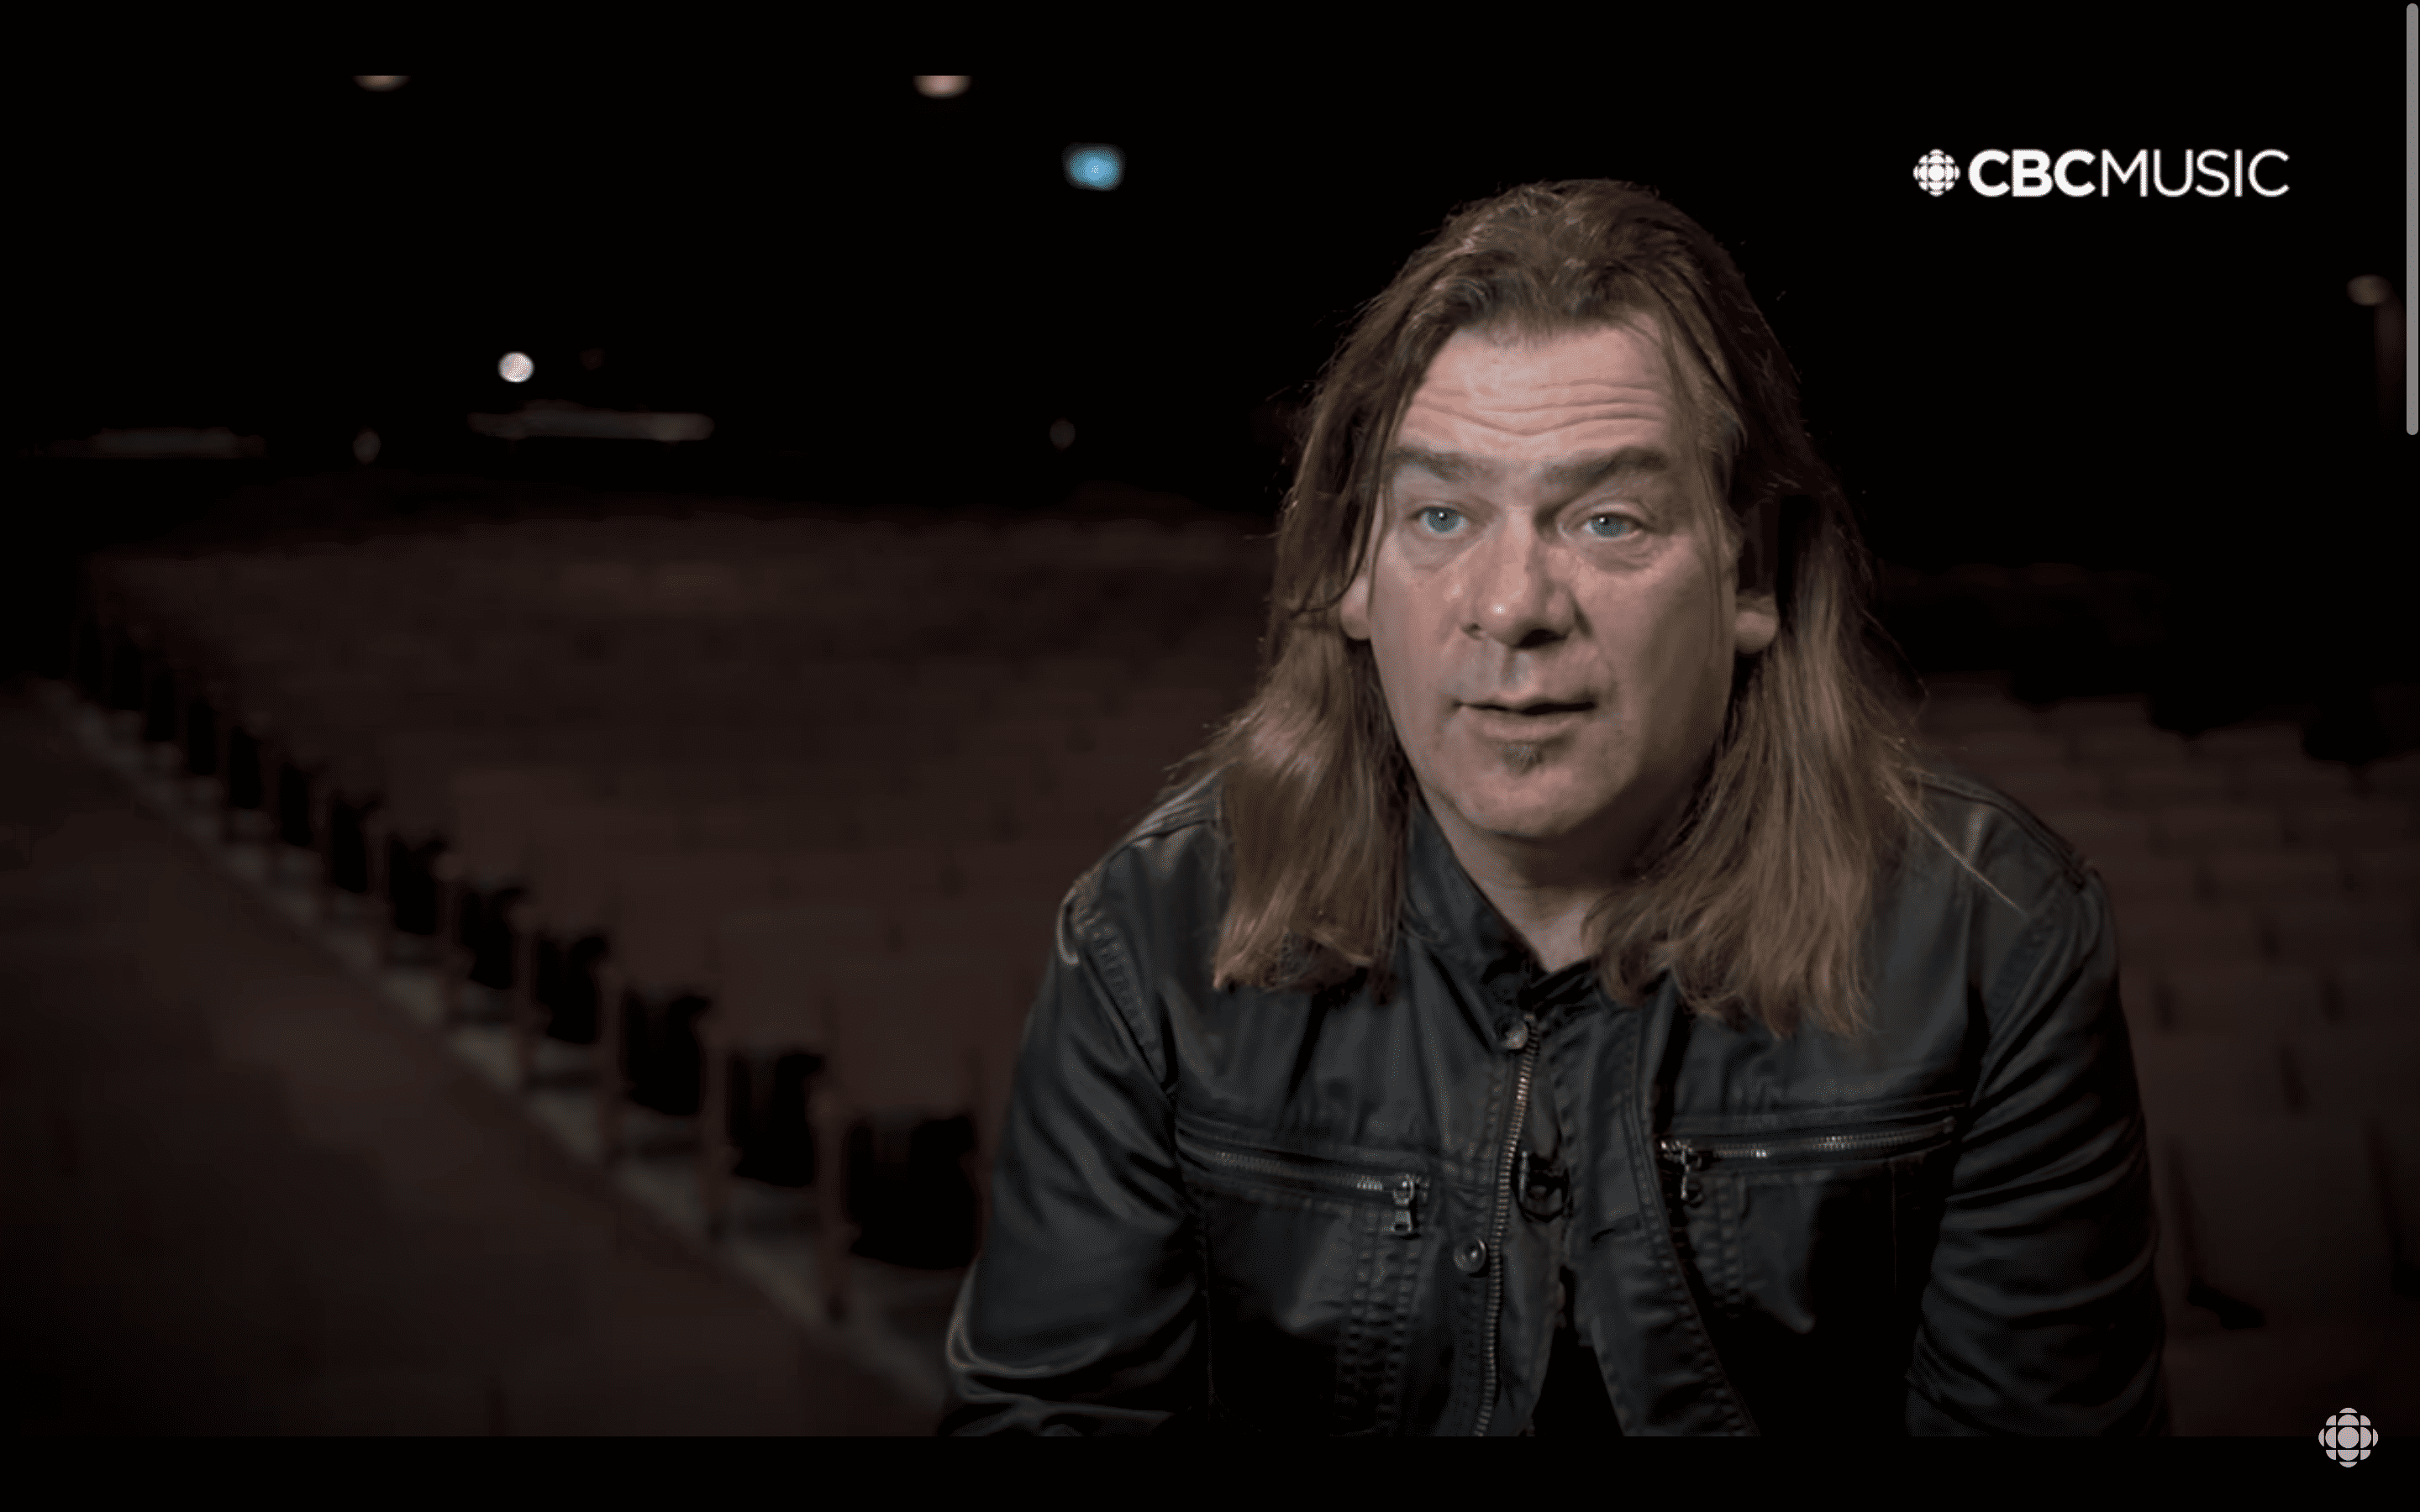 Alan Doyle, a light-skinned man with brown hair, giving an interview in an empty auditorium.